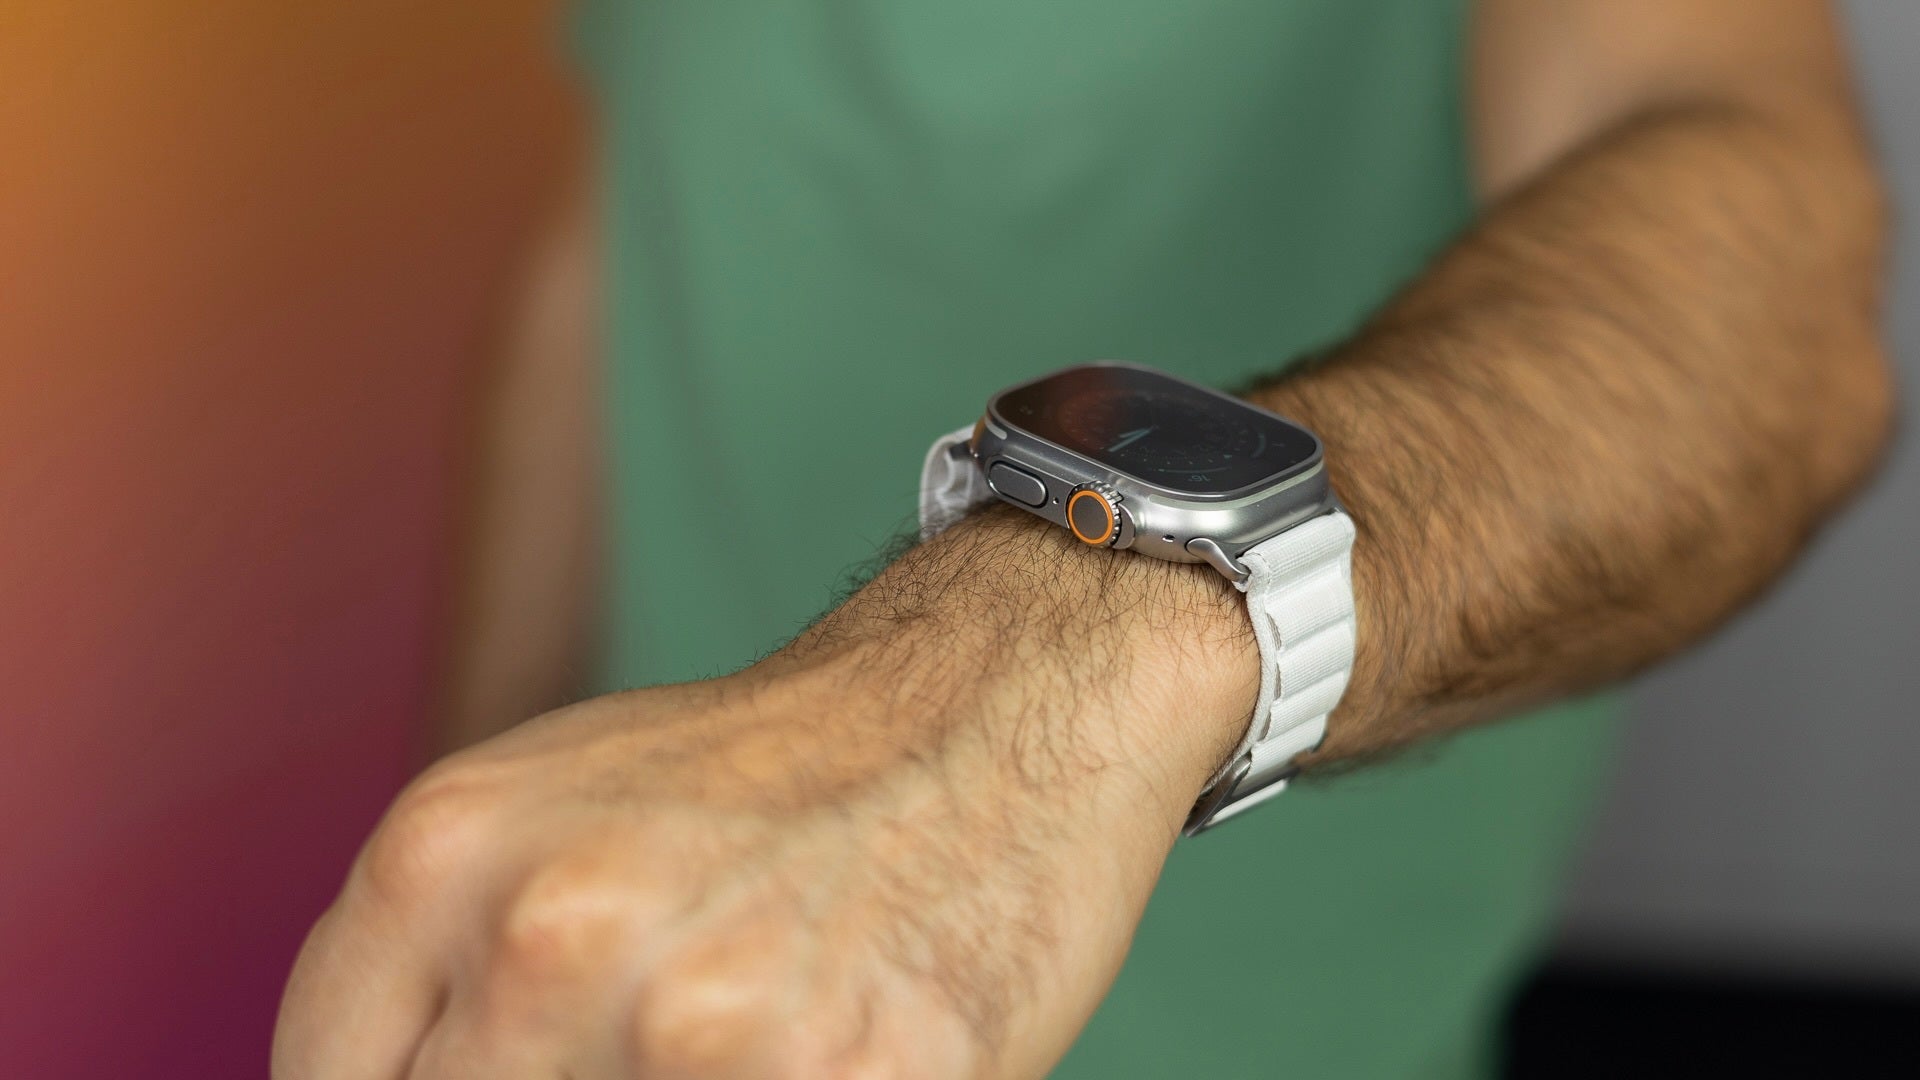 The Apple Watch Ultra from a casual buyer's perspective: Why it (may) be worth it